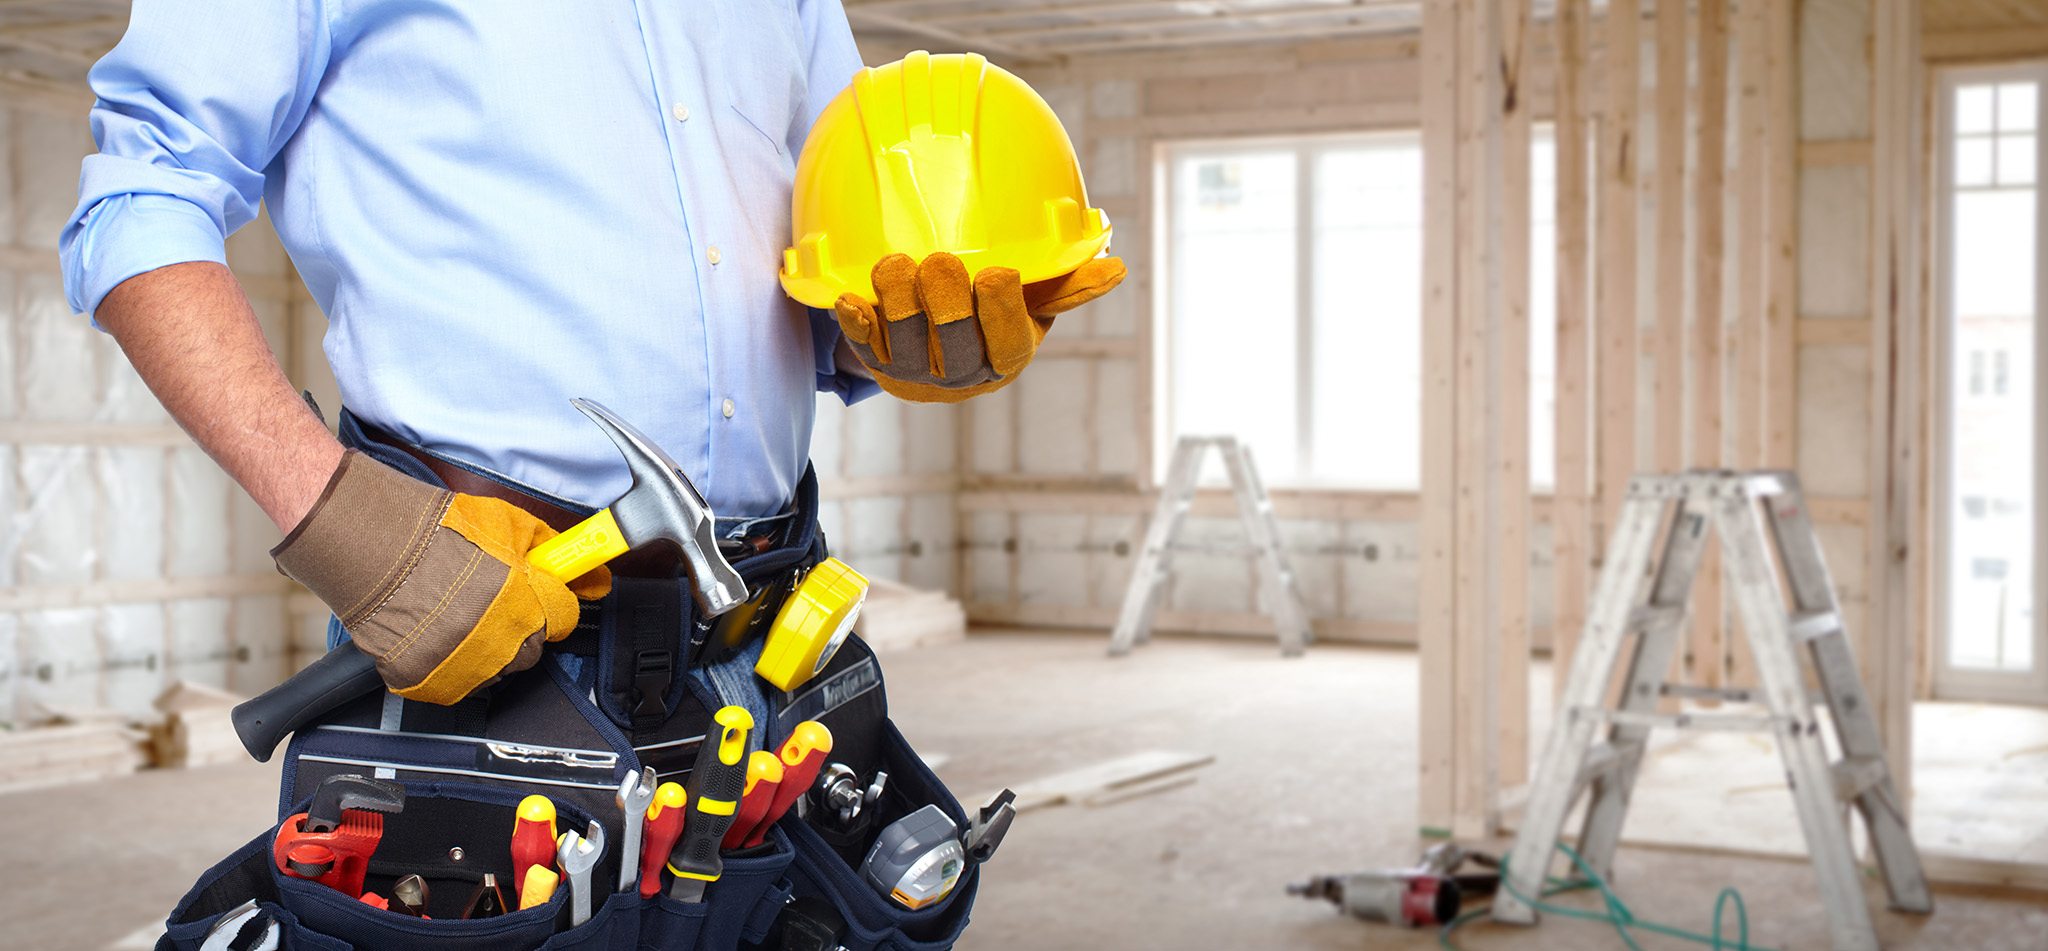 Hire The Services Of Home Repair Services In Colorado Springs CO